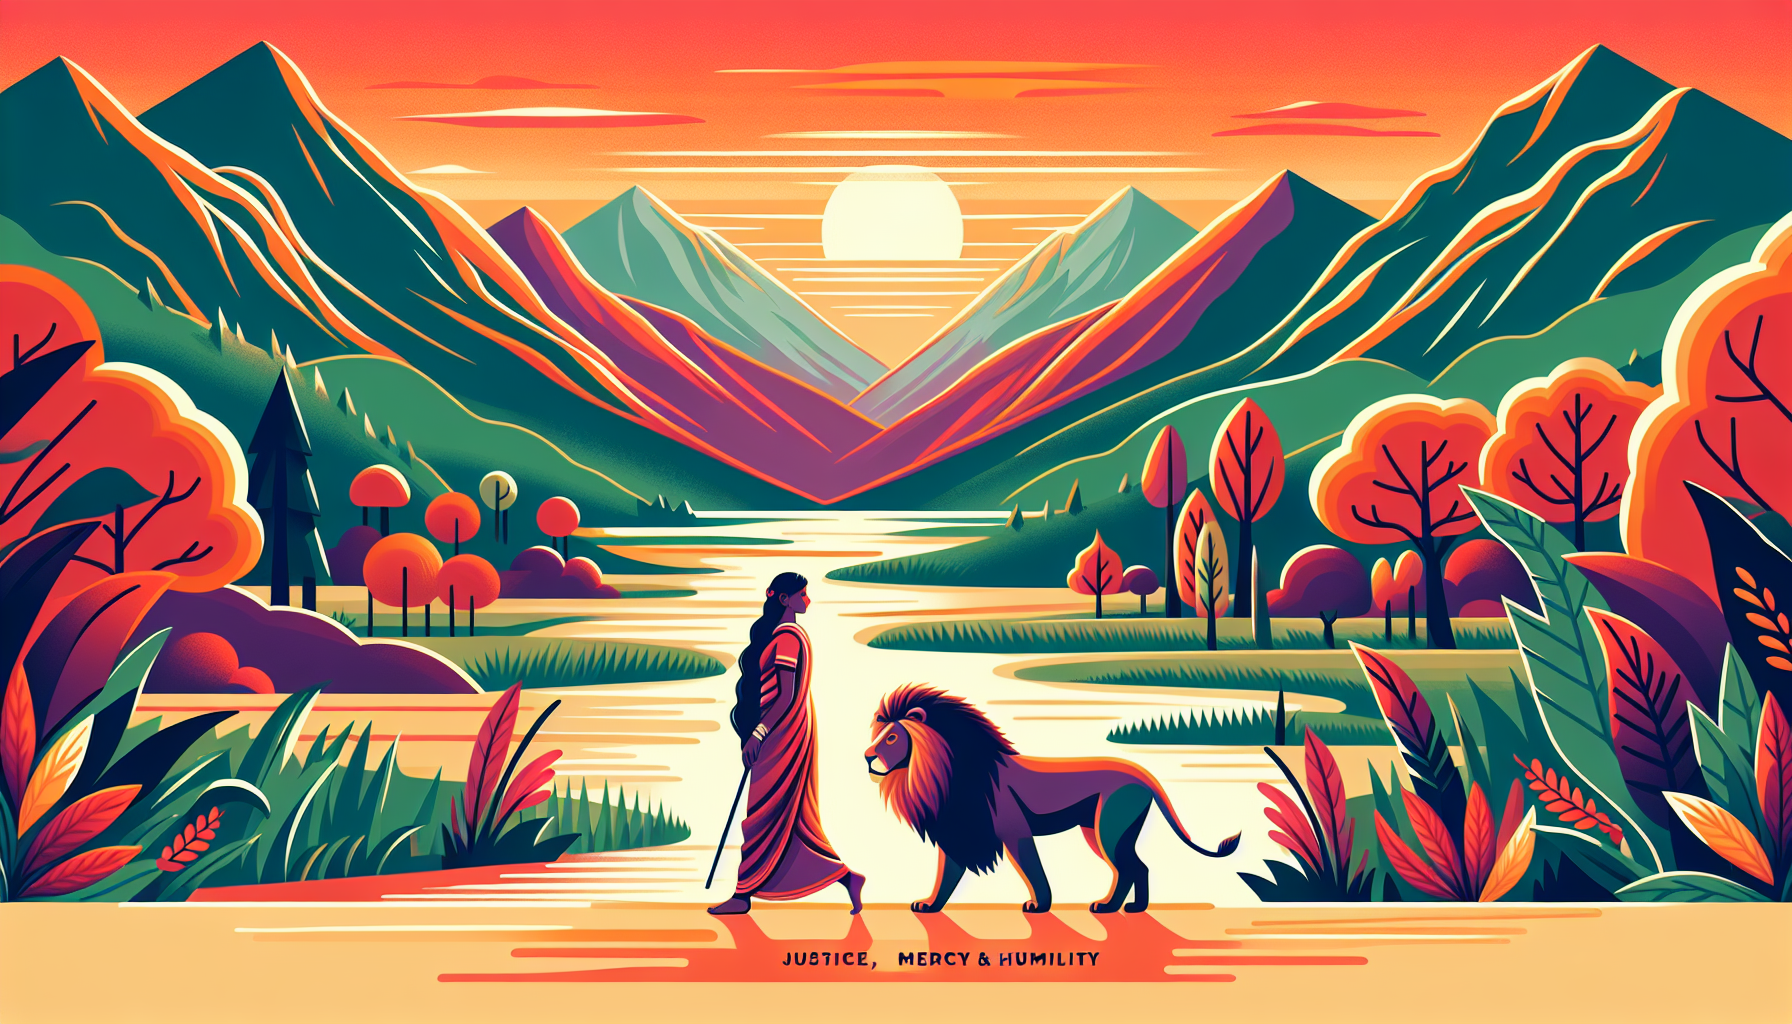 Serene landscape illustrating Micah 6:8, with a person walking humbly alongside a lion, both surrounded by mountains and a wide river, under a glowing sunset, symbolizing justice, mercy, and humility.